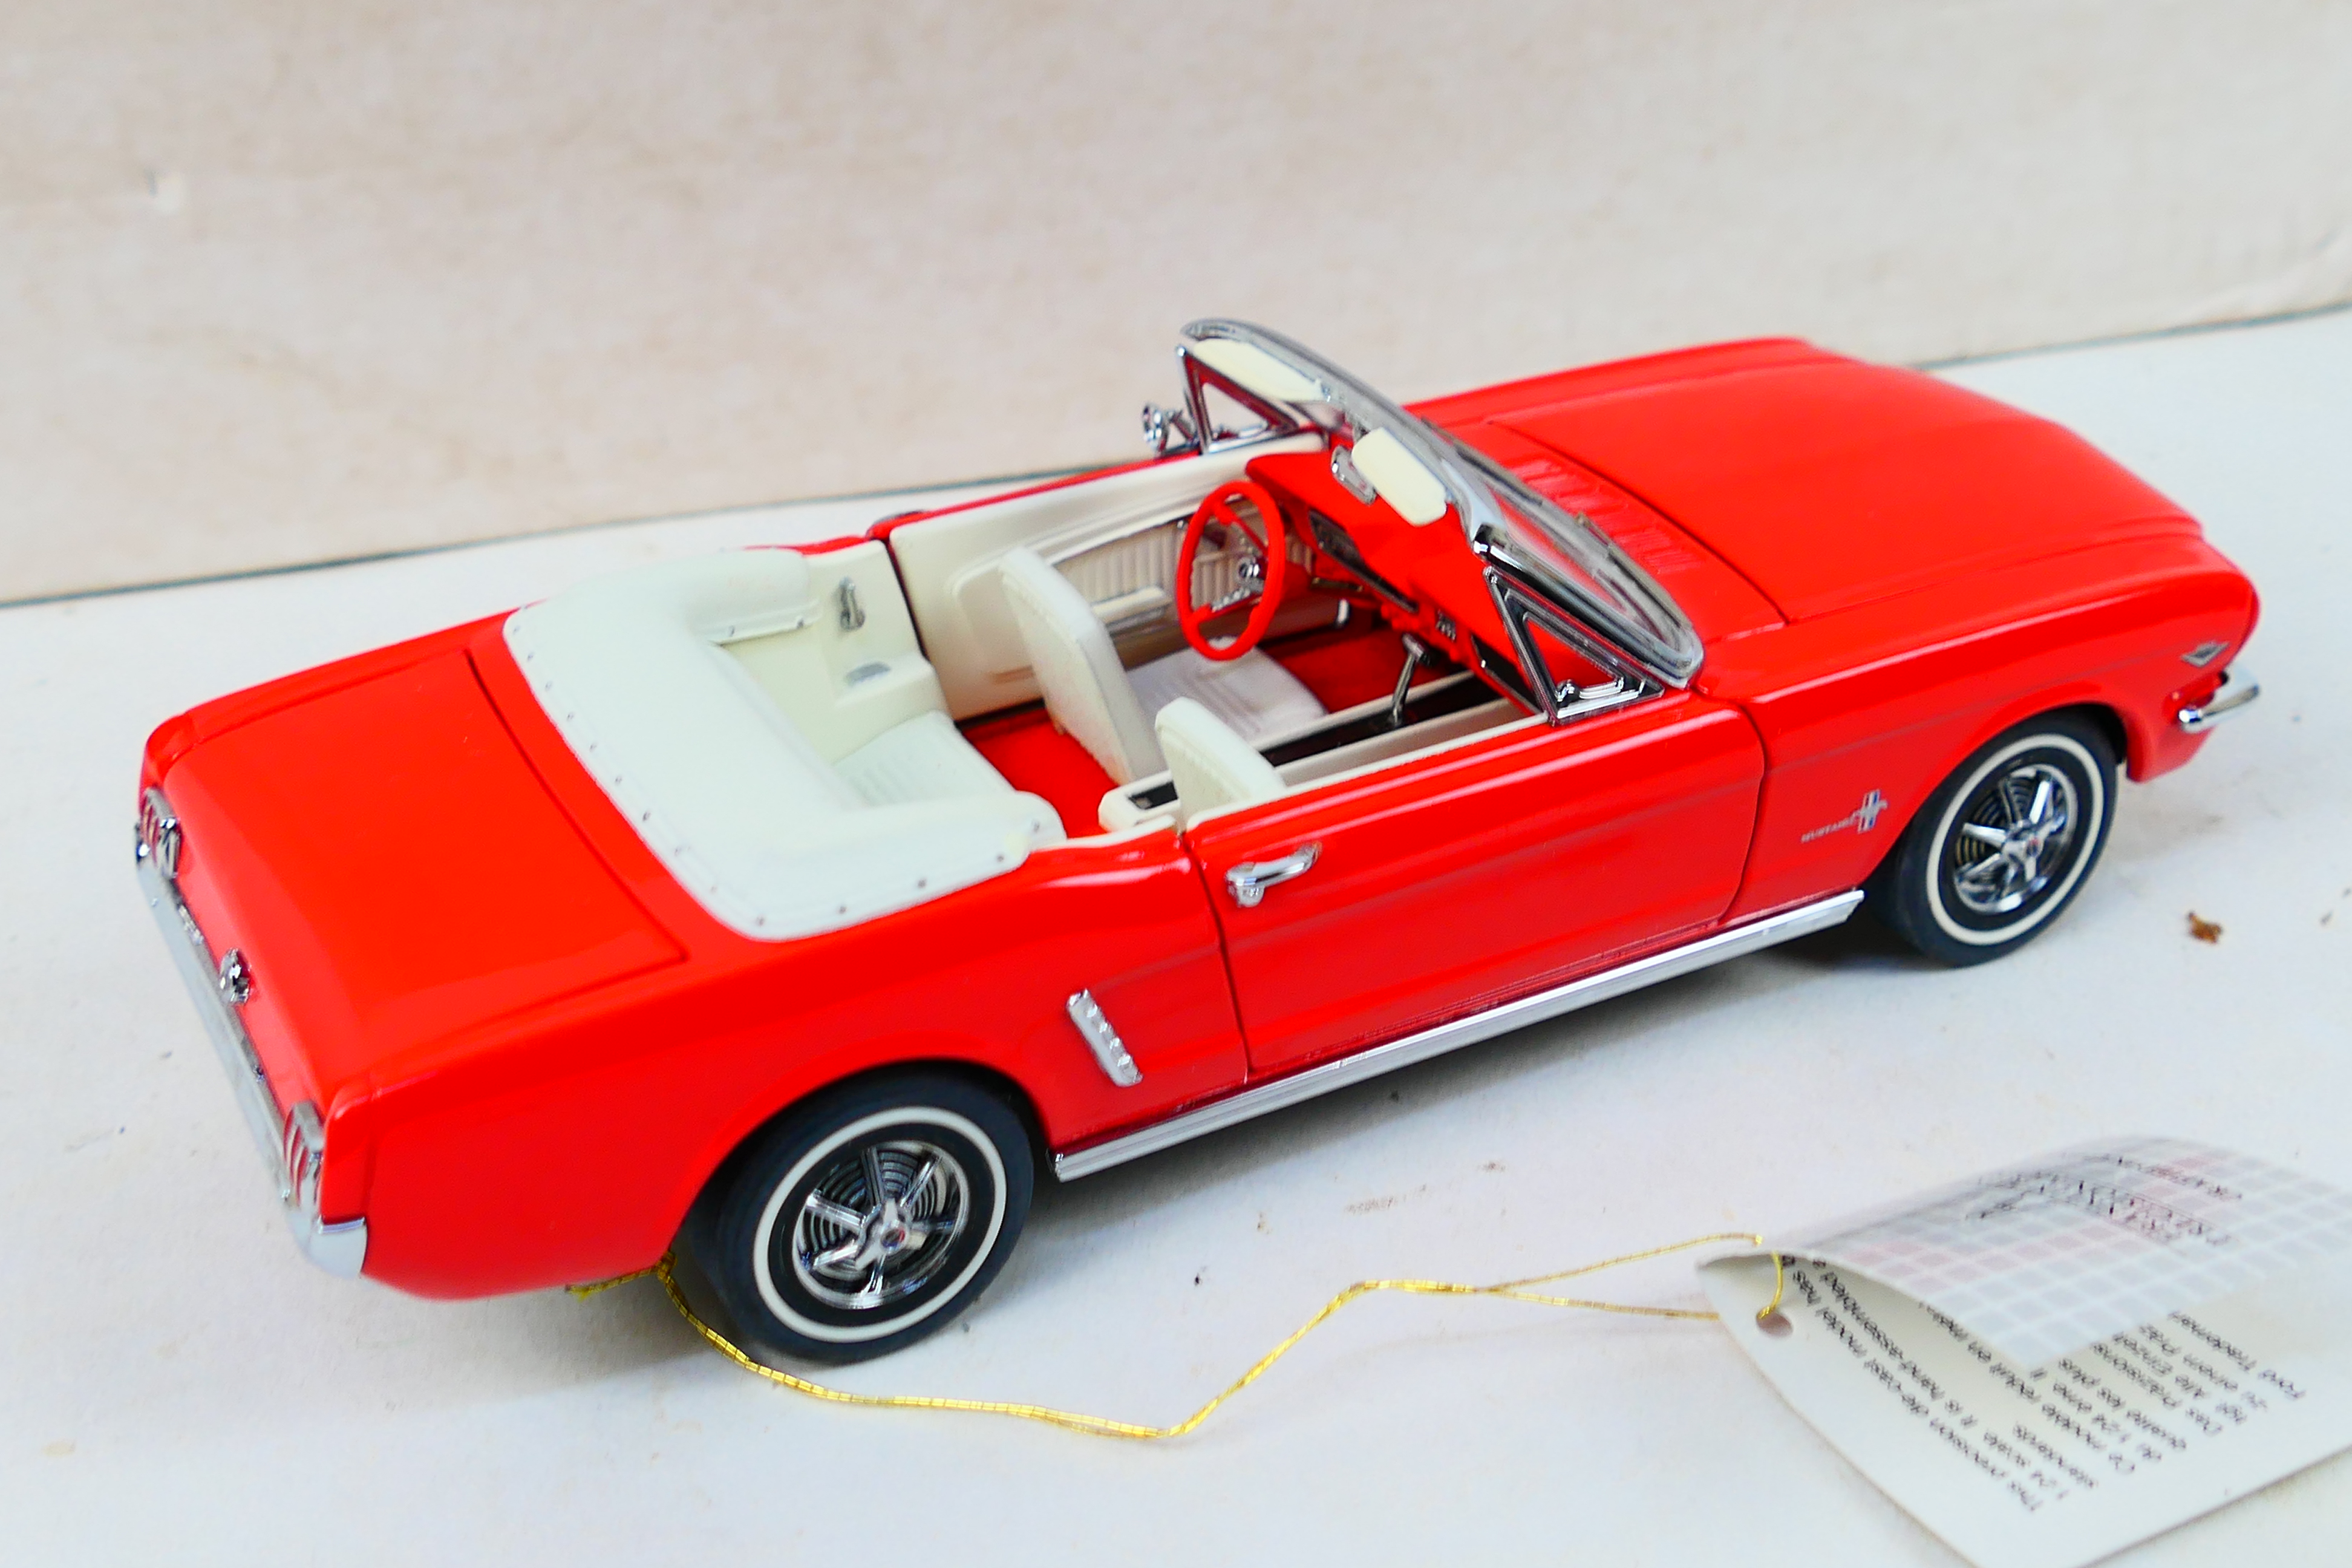 Franklin Mint - Precision Models. A boxed 1964 1/2 Ford Mustang, appearing in Excellent condition. - Image 3 of 3